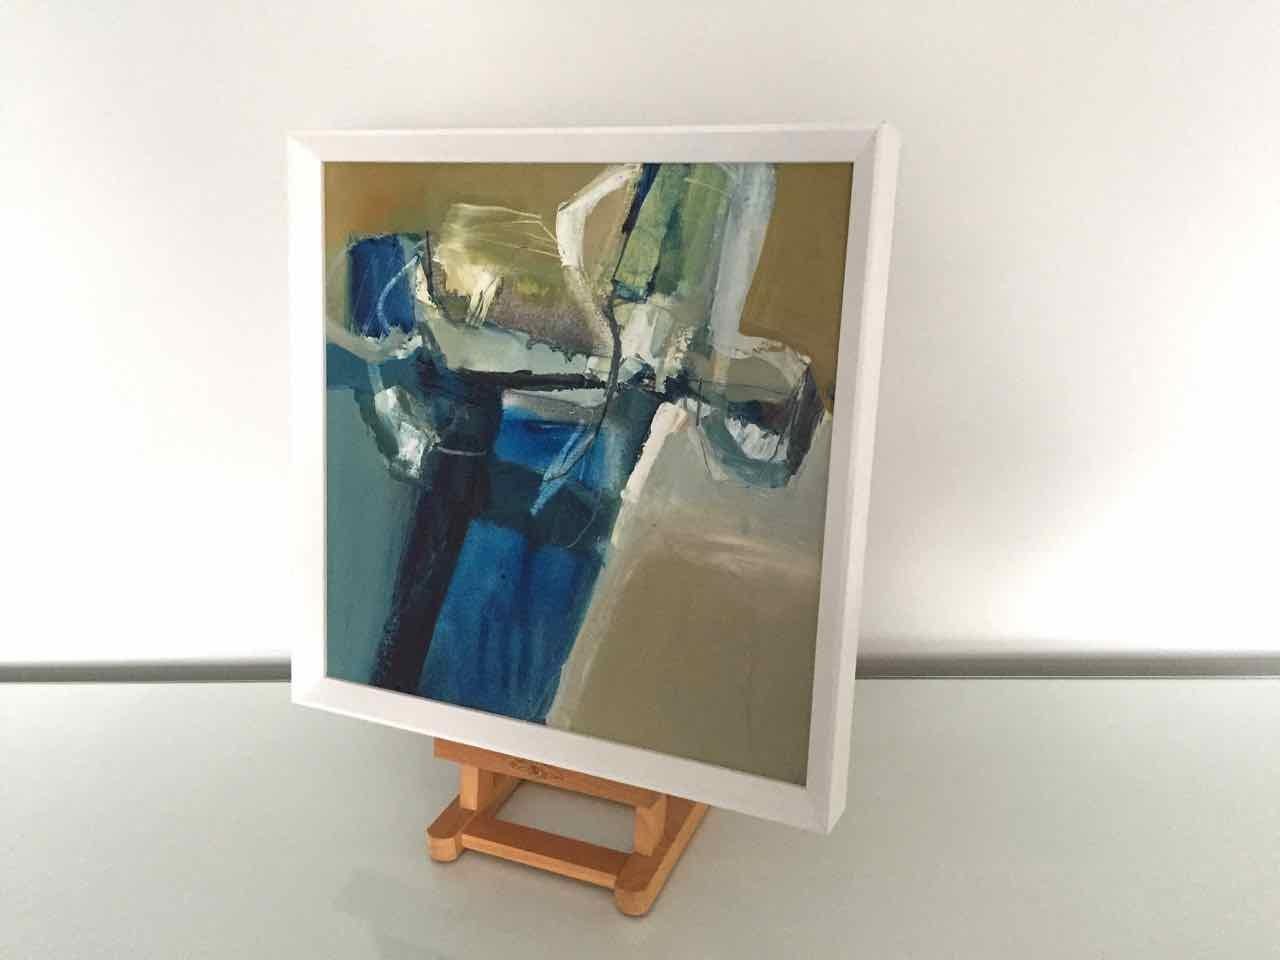 Locked, 2018, Oil on canvas, 15 × 15 in, 38 × 38 cm by Chris Sims

This is a small Chris Sims oil painting on canvas, perfect for a small corner, and is sold in a very elegant tray frame.

Chris Sims is a contemporary English abstract painter, using